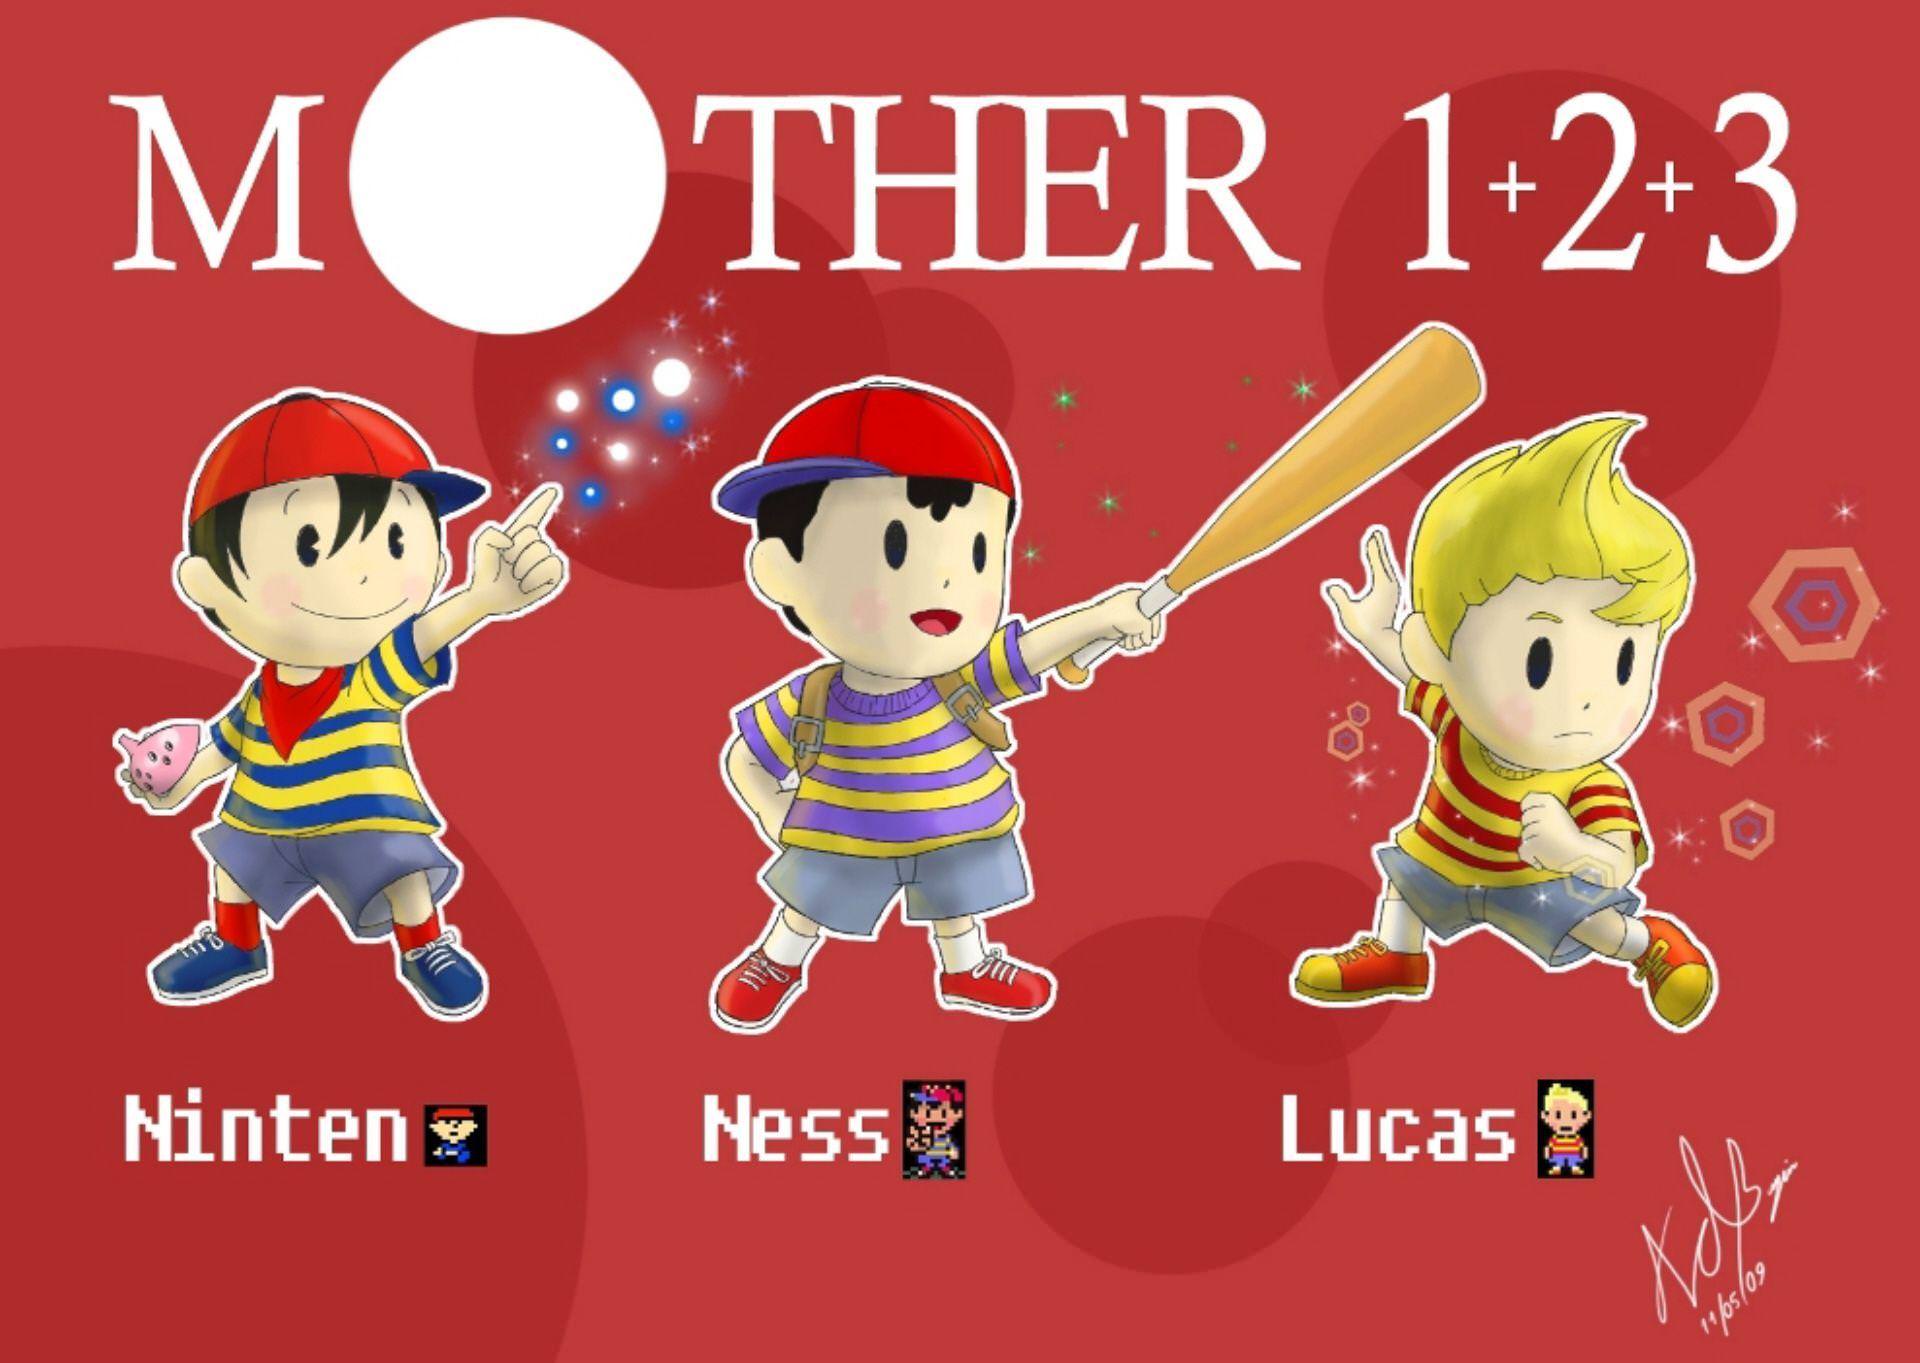 EarthBound 4k Animated Wallpaper  Ｉ Ｔ Ｚ Ａ Ｈ s Kofi Shop  Kofi   Where creators get support from fans through donations memberships  shop sales and more The original Buy Me a